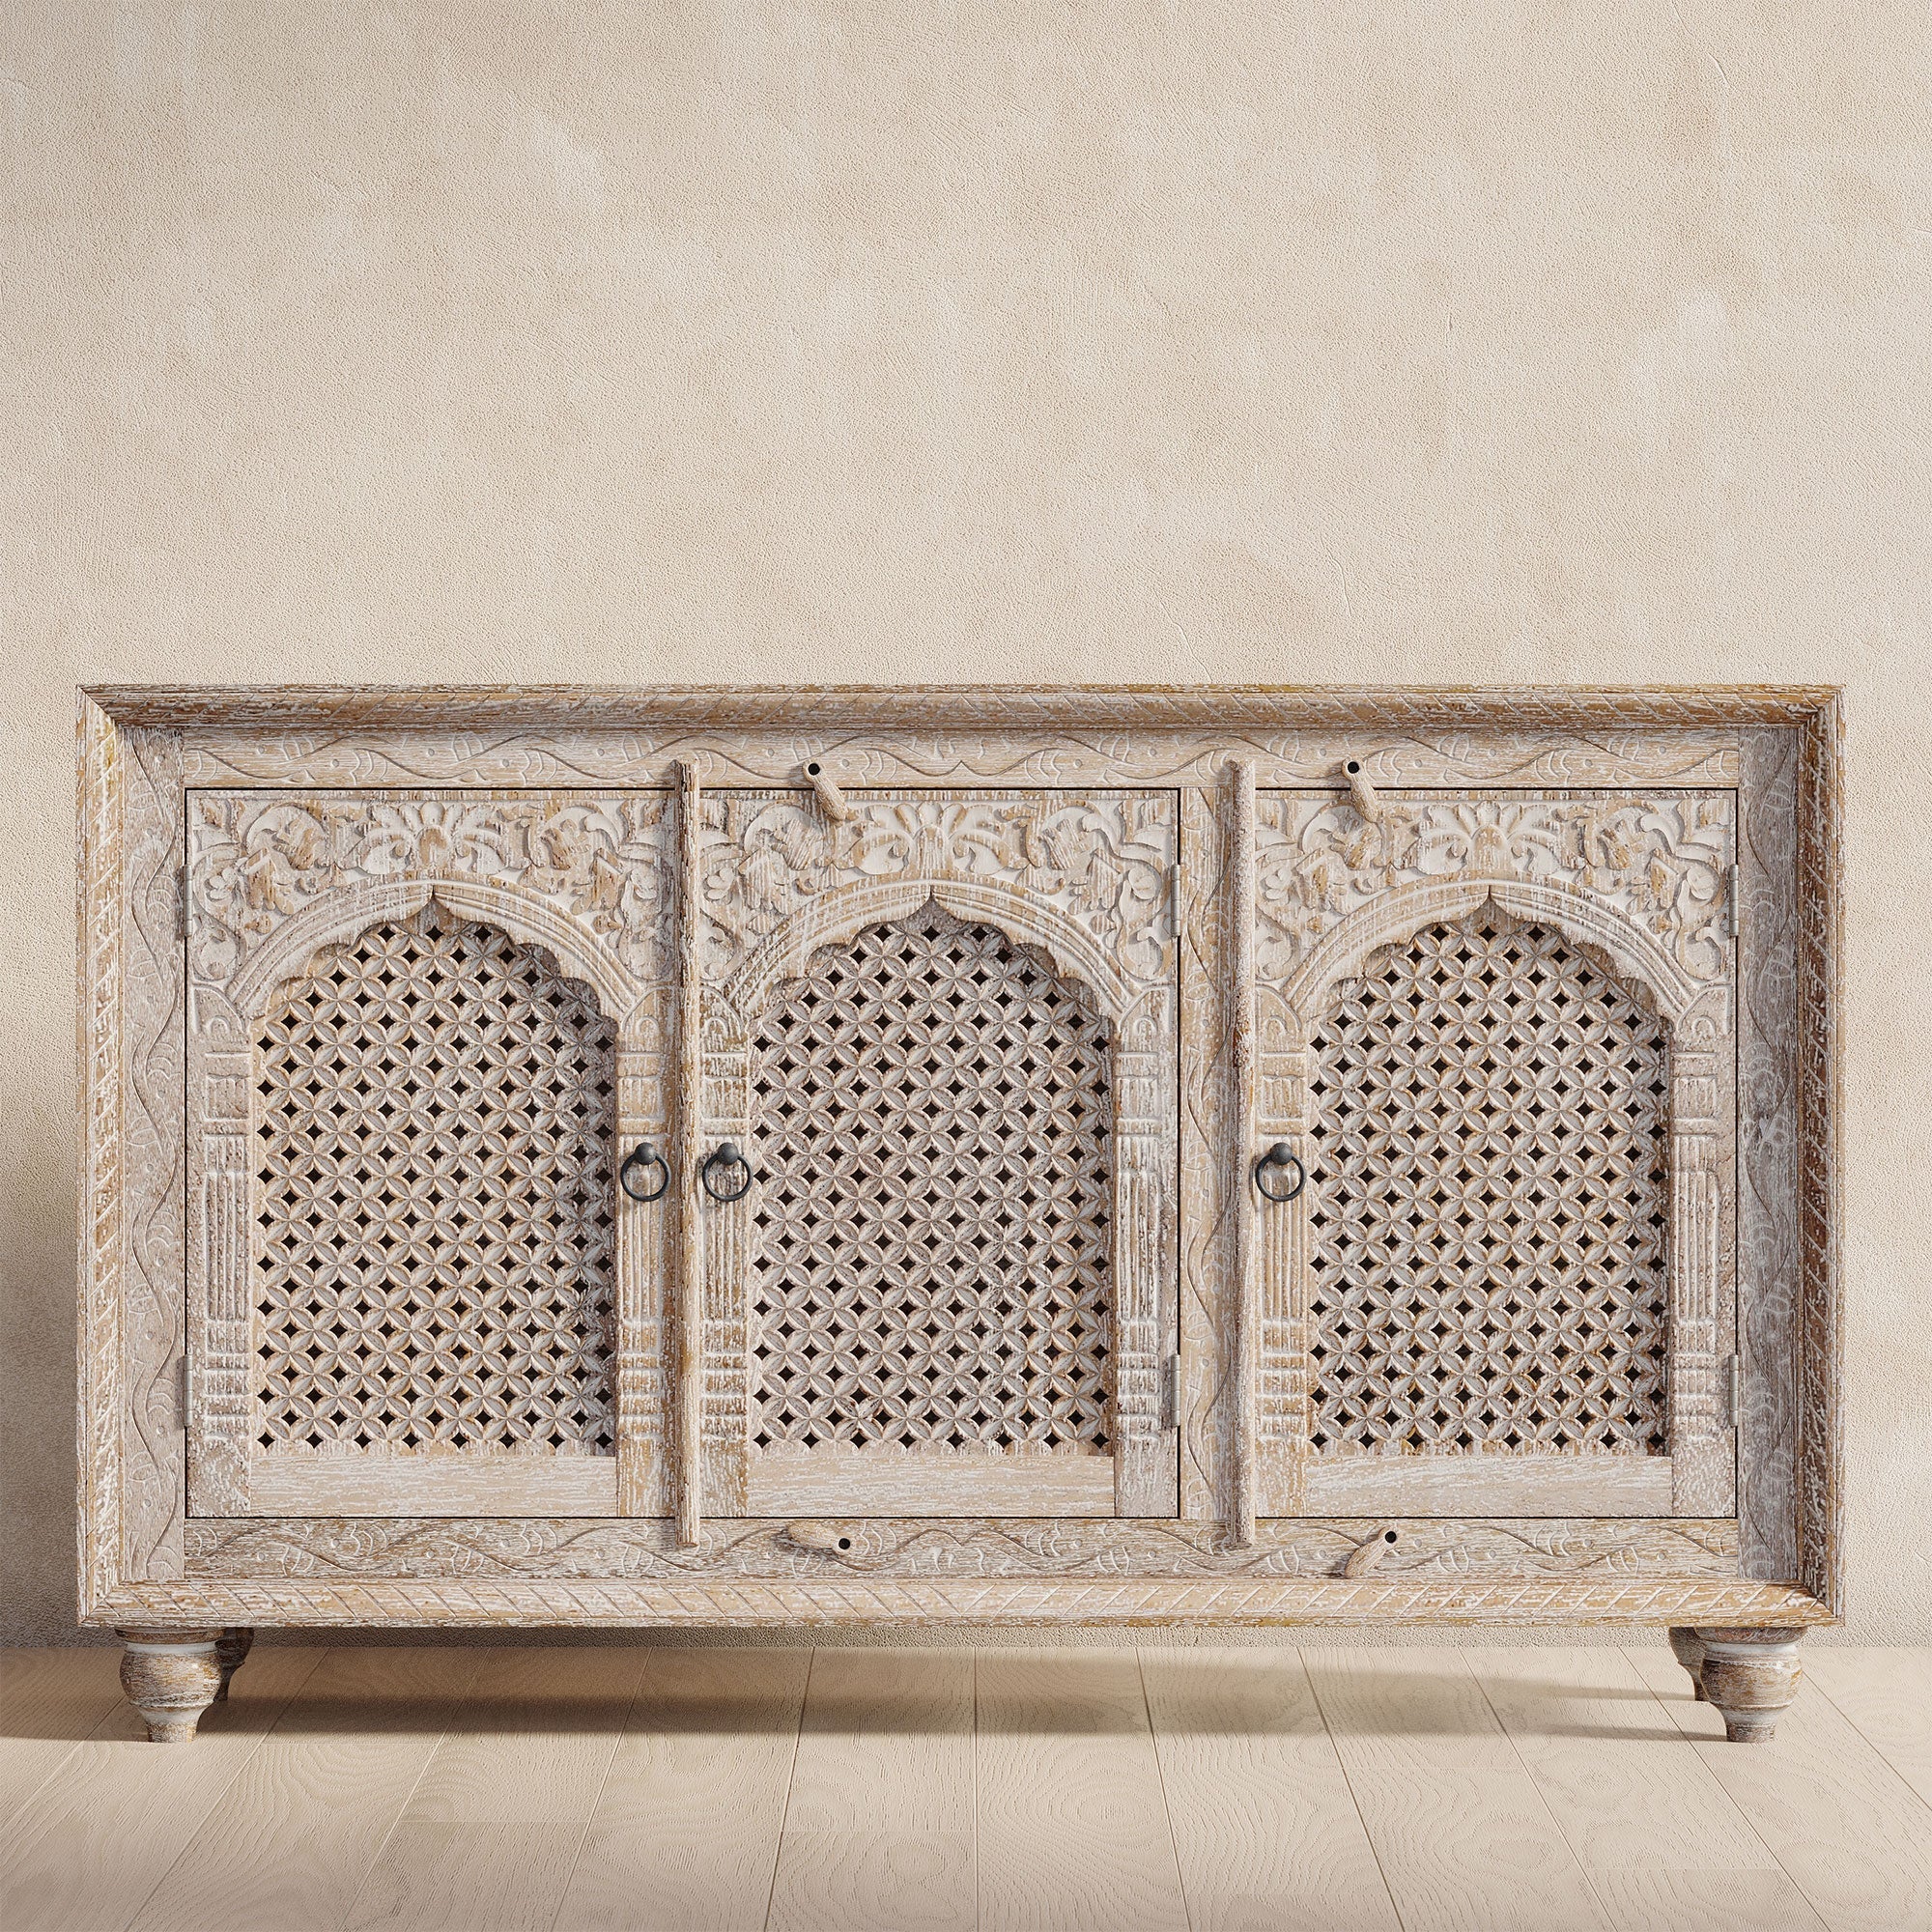 Patrin Nomad Wooden Sideboard in Distressed Natural Finish in Cabinets by VMInnovations